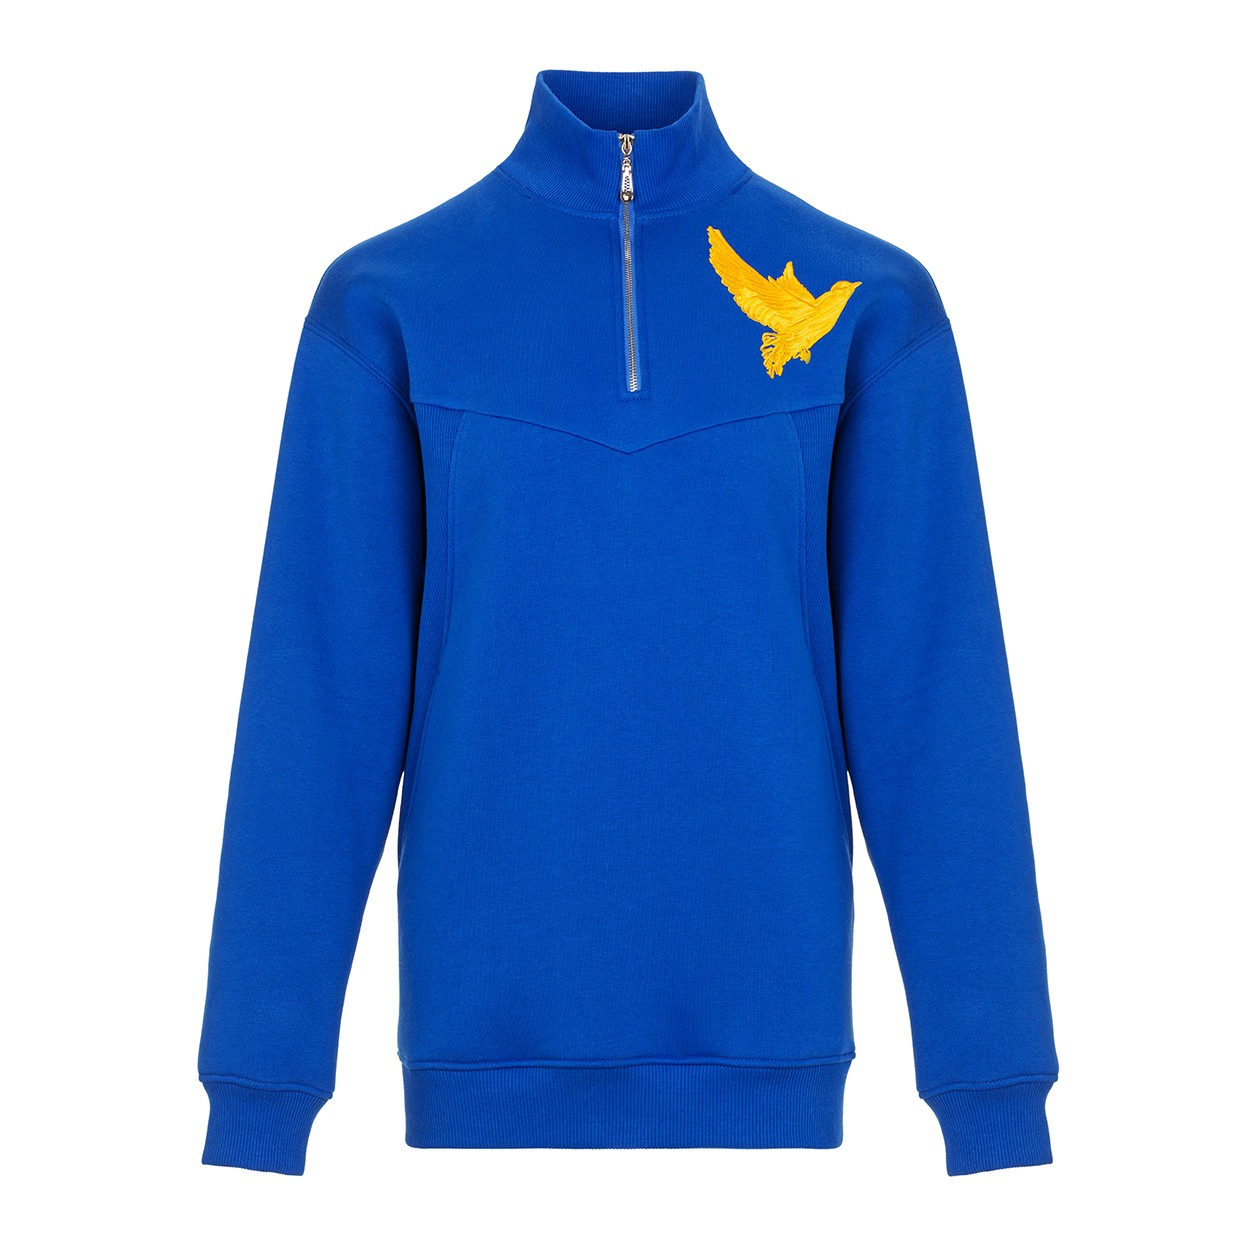 Blue sweatshirt with embroidery